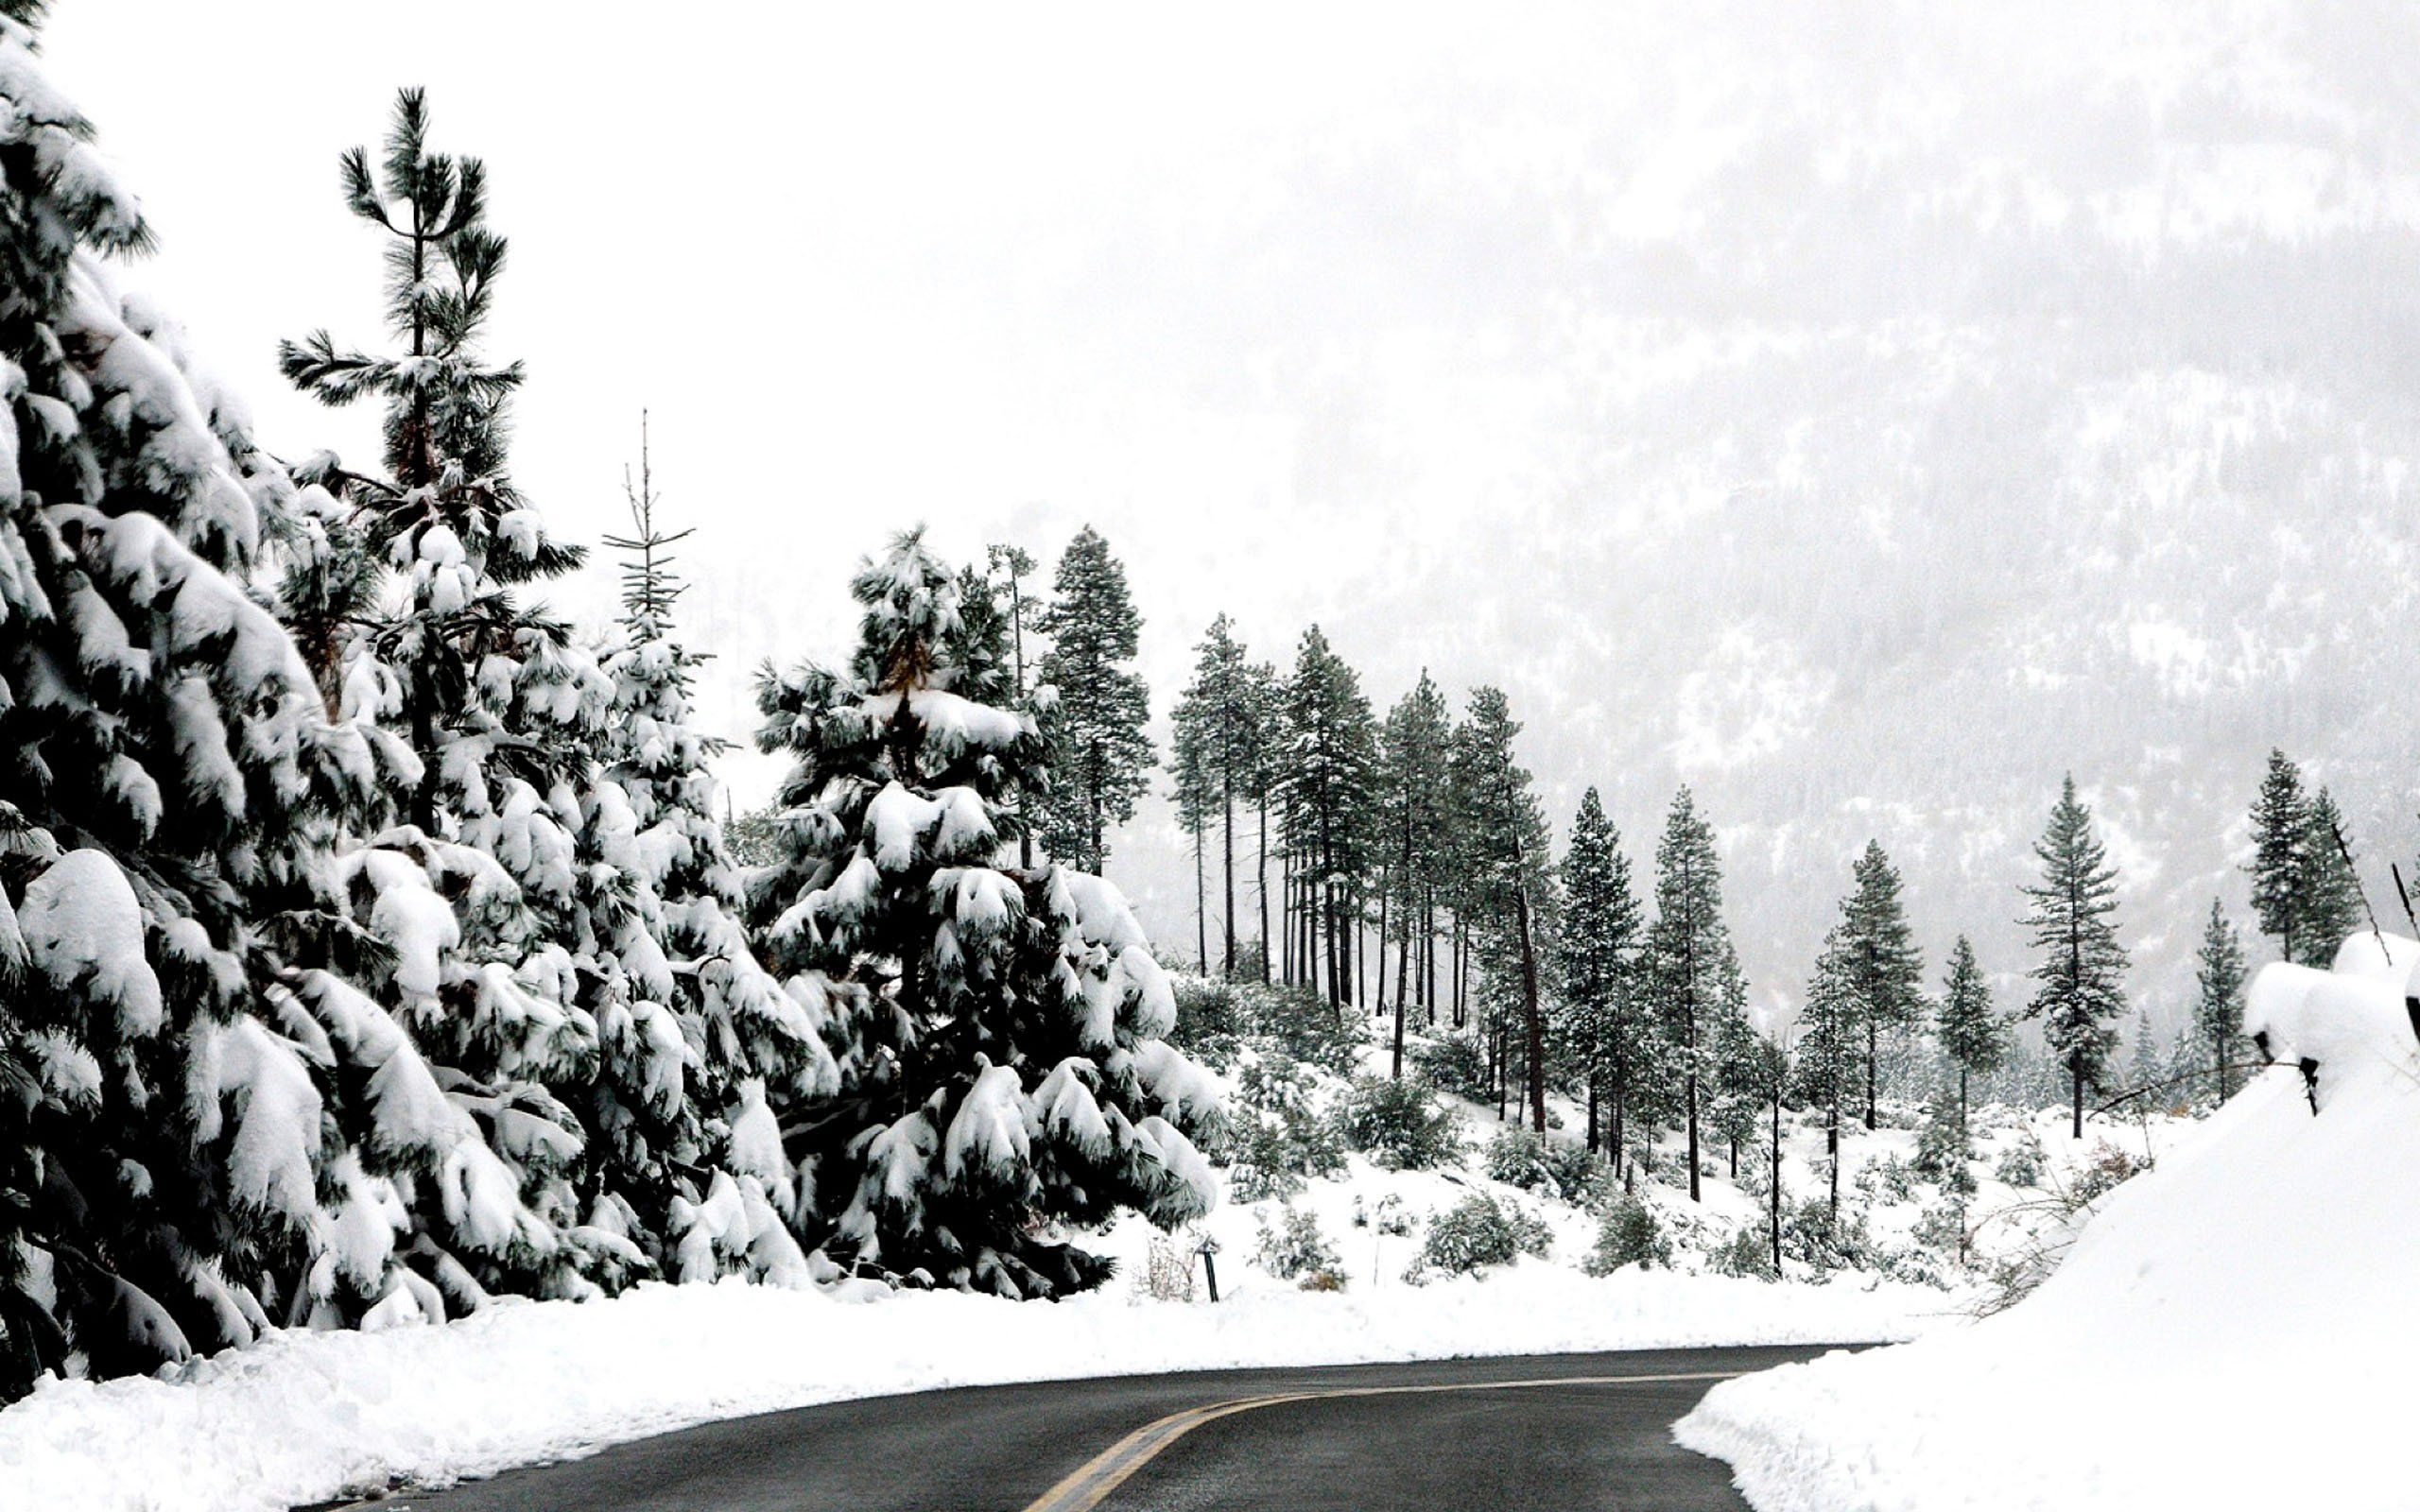 A snowy road with trees on both sides - Winter